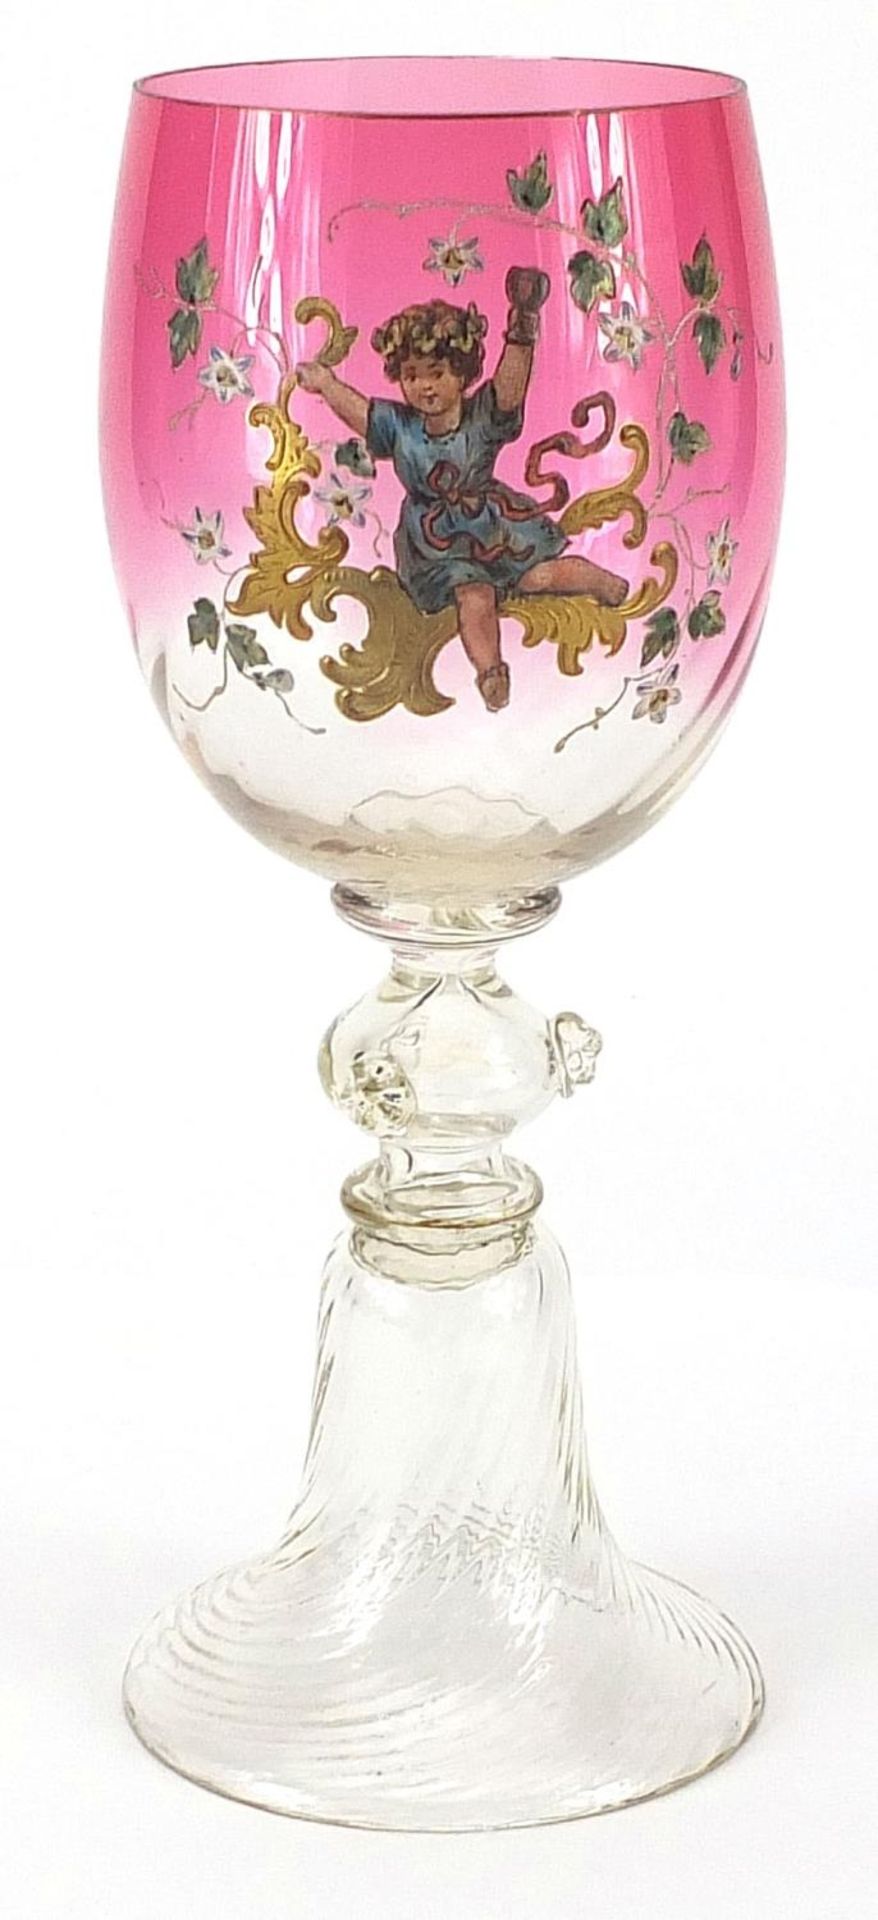 Attributed to Moser, large bohemian writhen glass cup enamelled with a child amongst flowers, 25.5cm